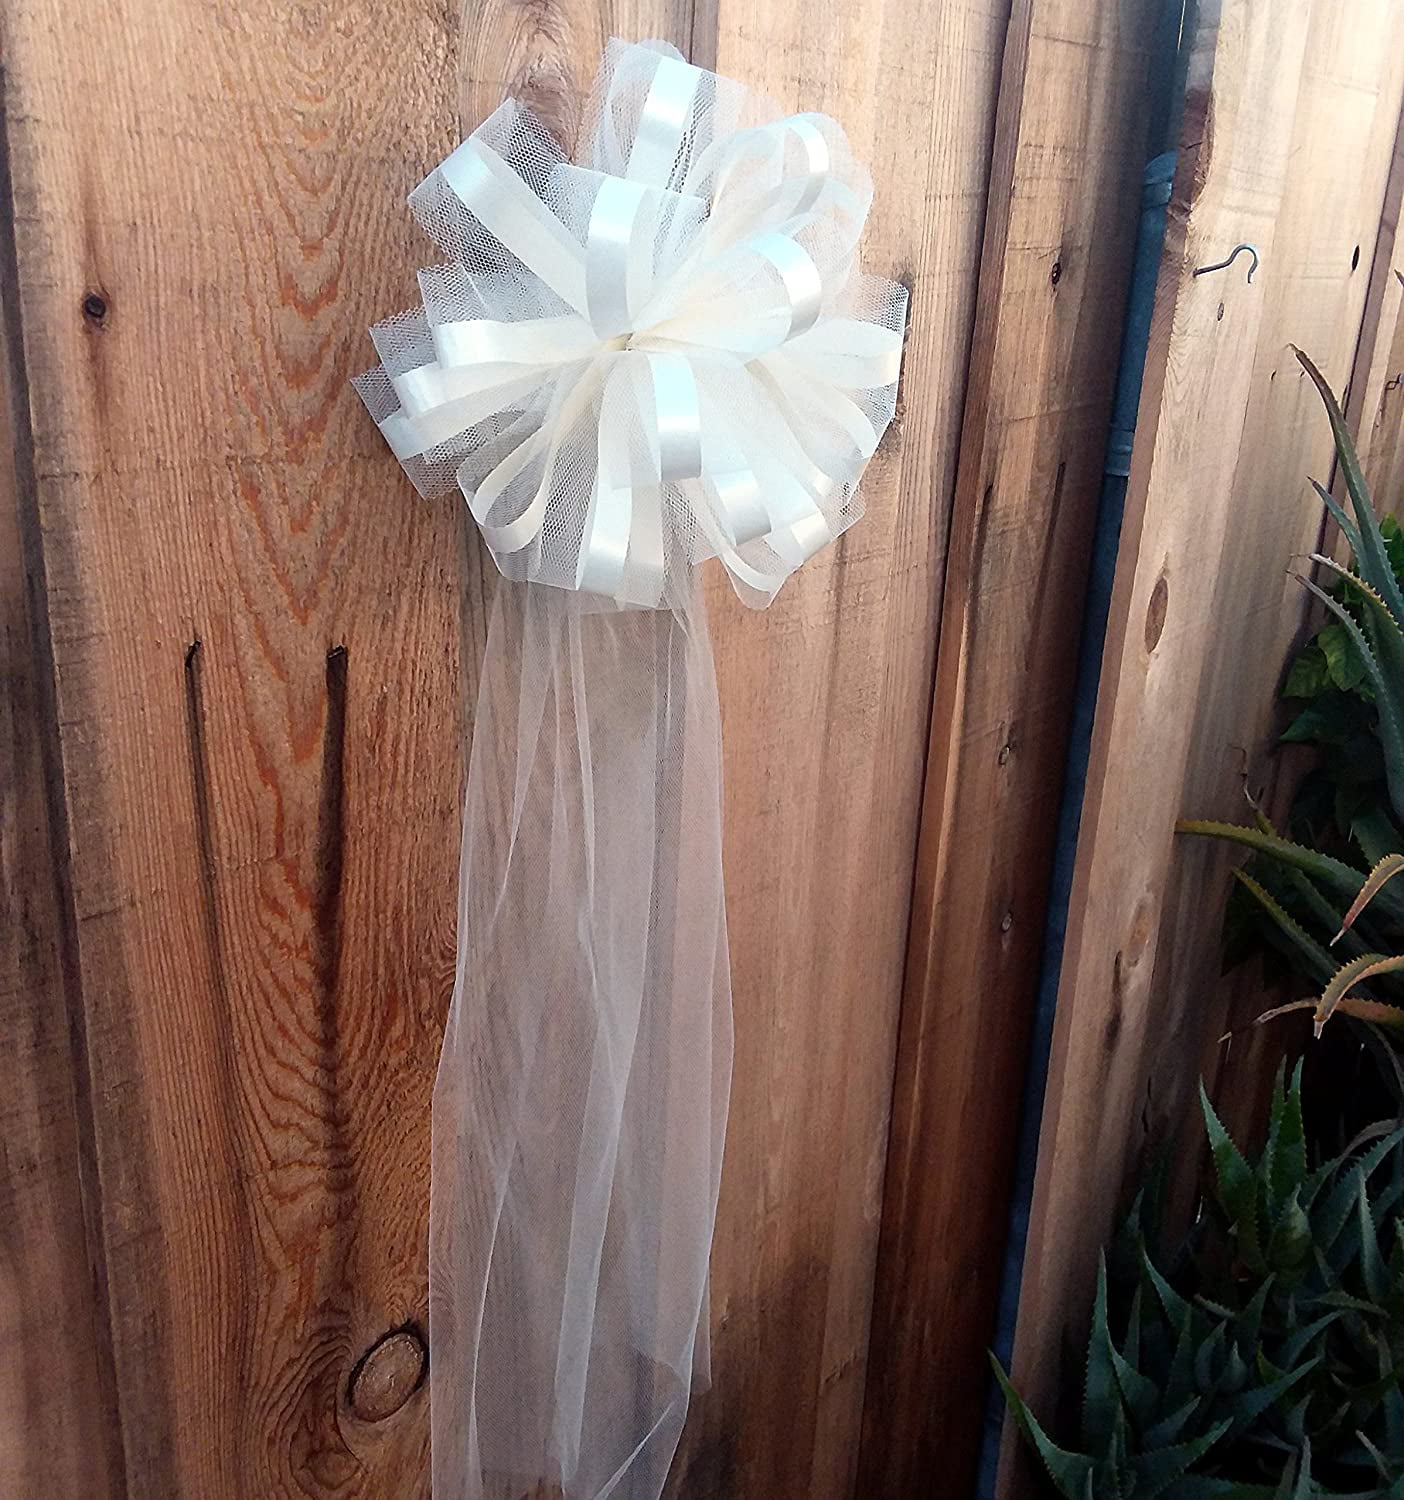 Wedding Bows - Pew Bows - Wired Mystic White Lace Bows 10 Inch